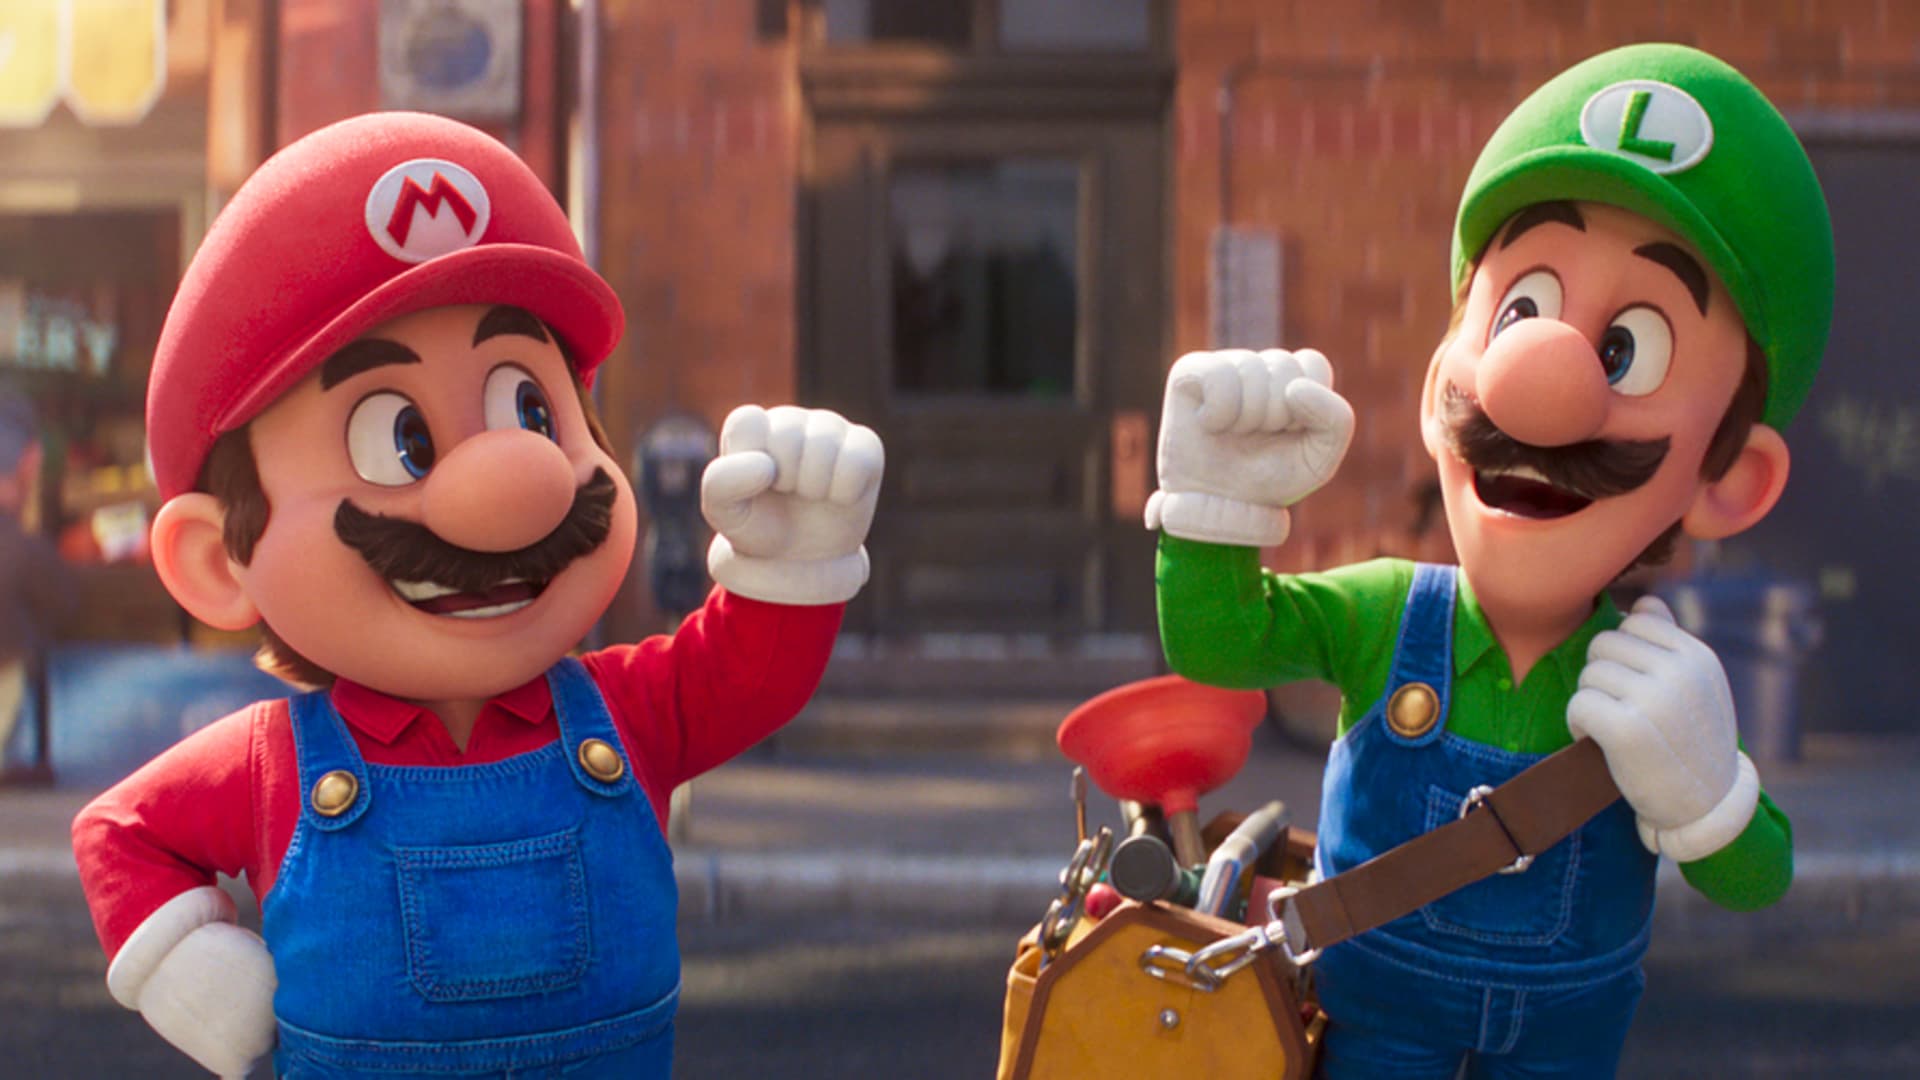 From ‘Super Mario’ to ‘The Little Mermaid’: The 10 highest-grossing movies of the first half of 2023